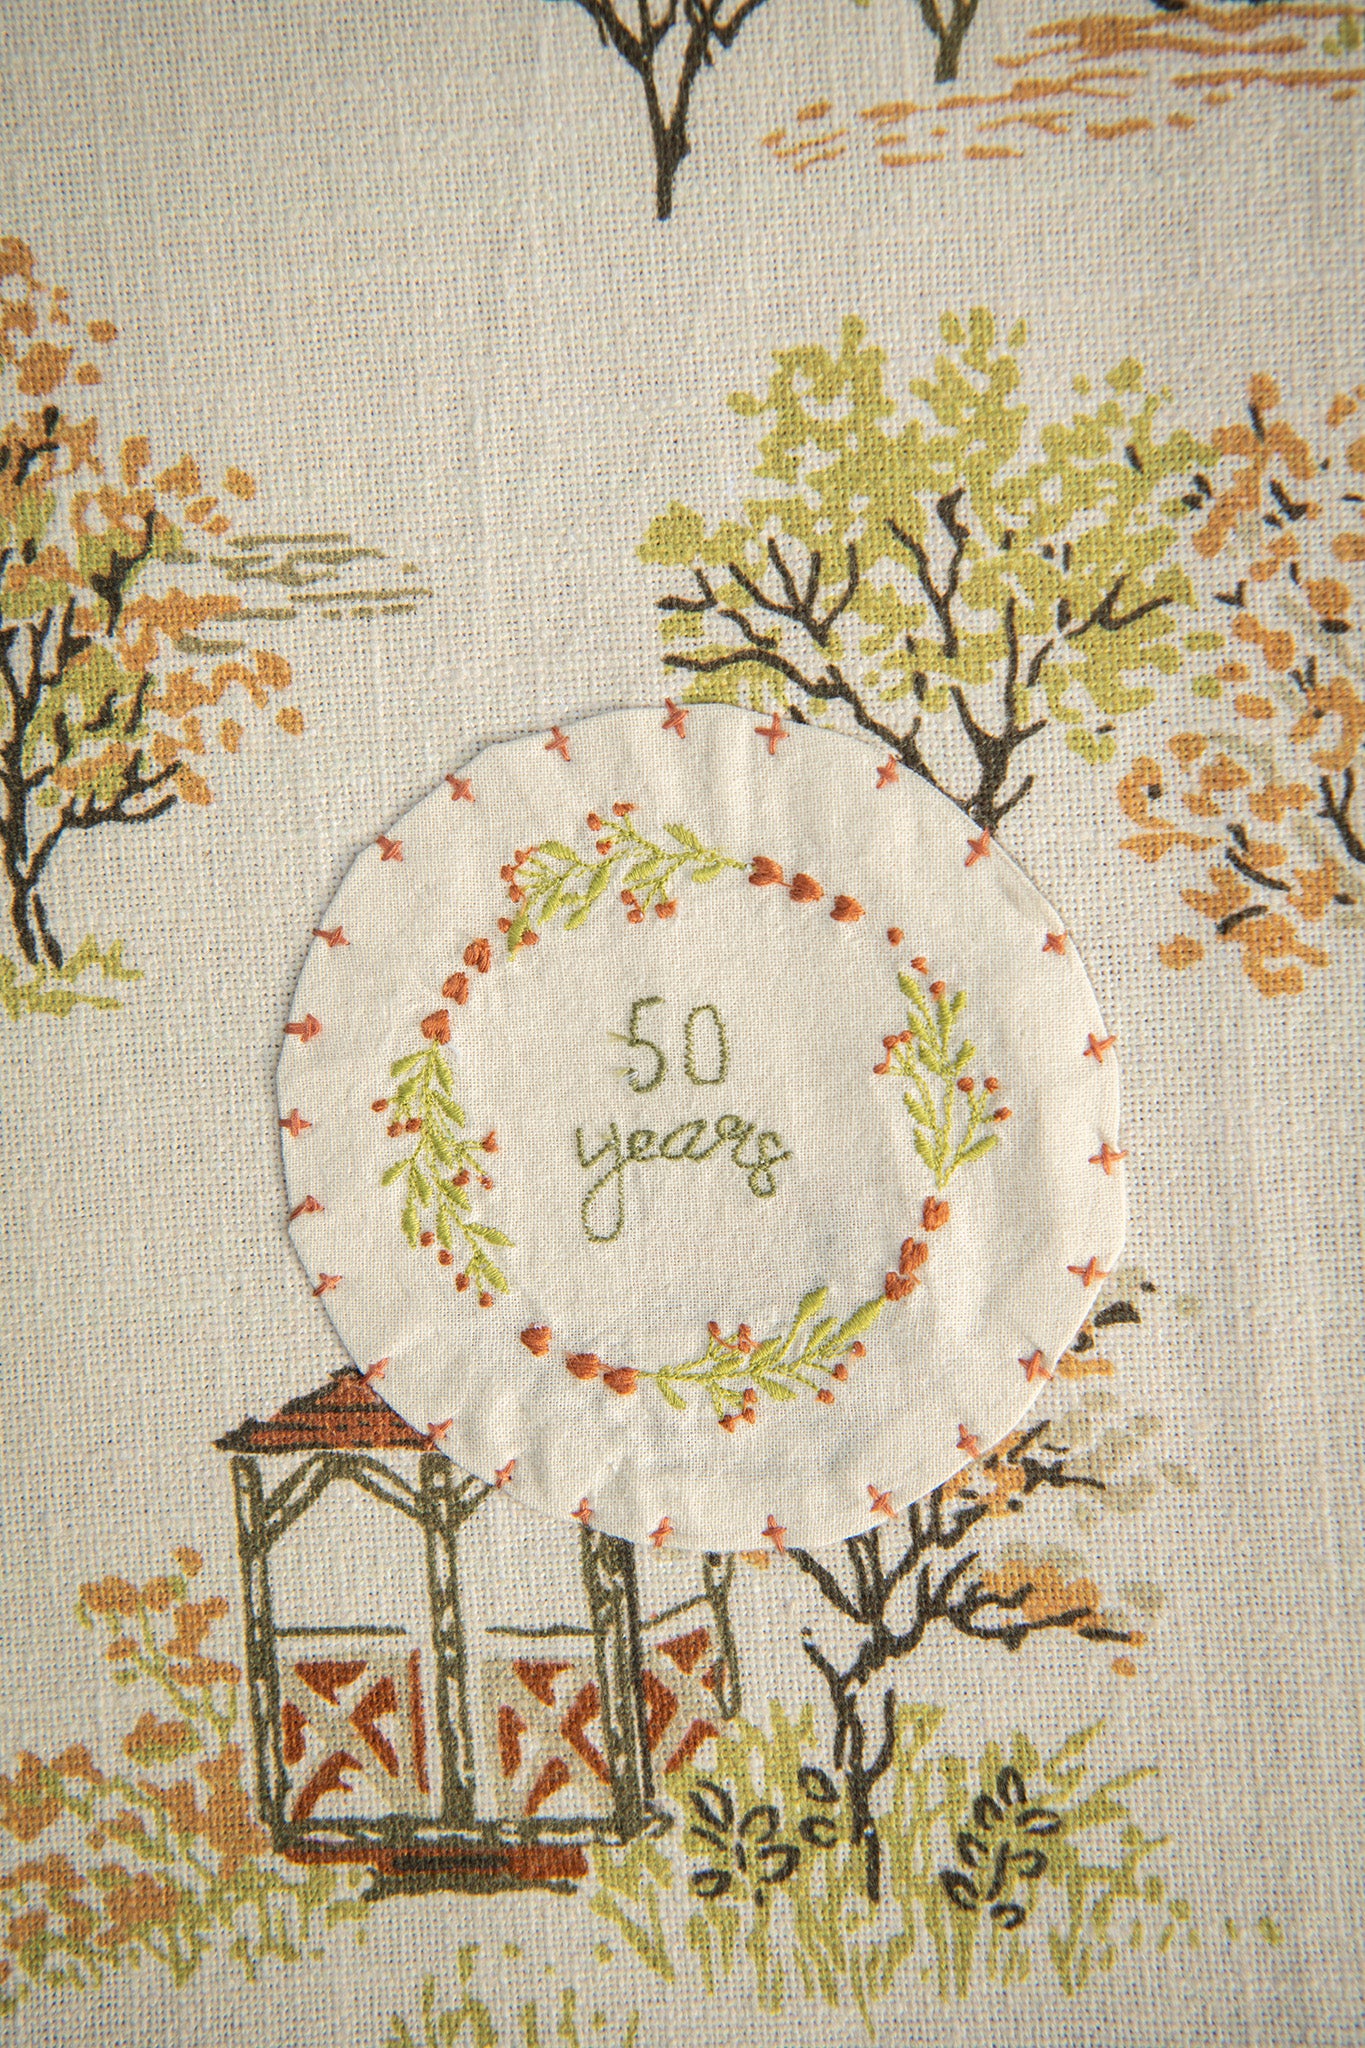 Limited-Edition '50 Years on the Prairie' Tea Towel in Natural